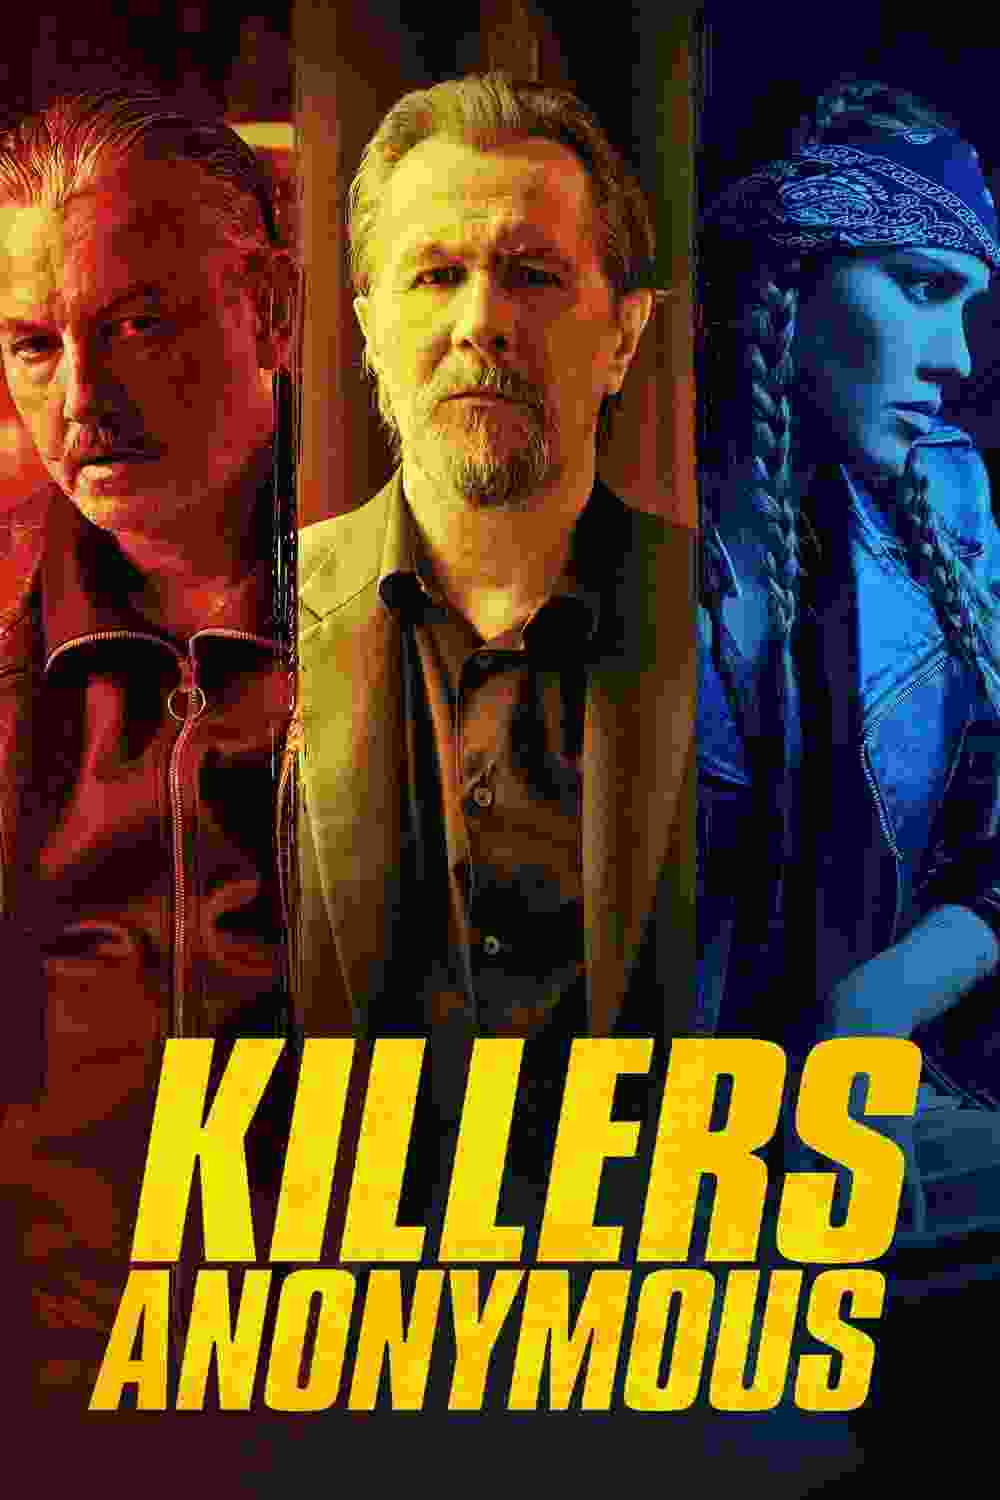 Killers Anonymous (2019) Tommy Flanagan